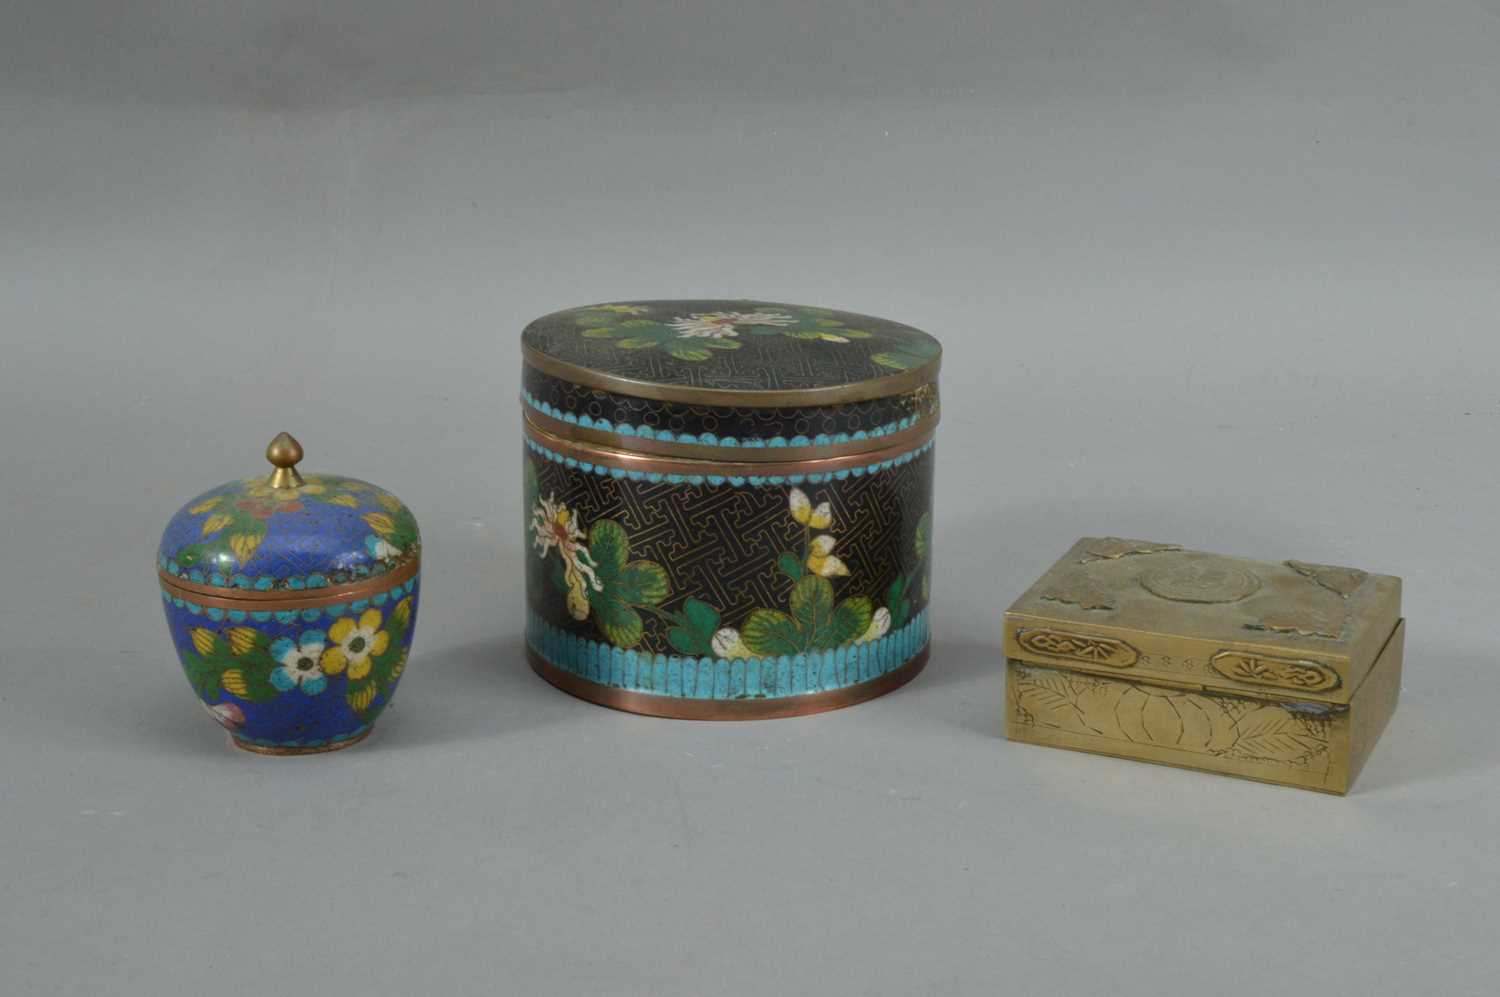 Lot 91 - A far eastern metal and enamel cloisonne circular jar and cover